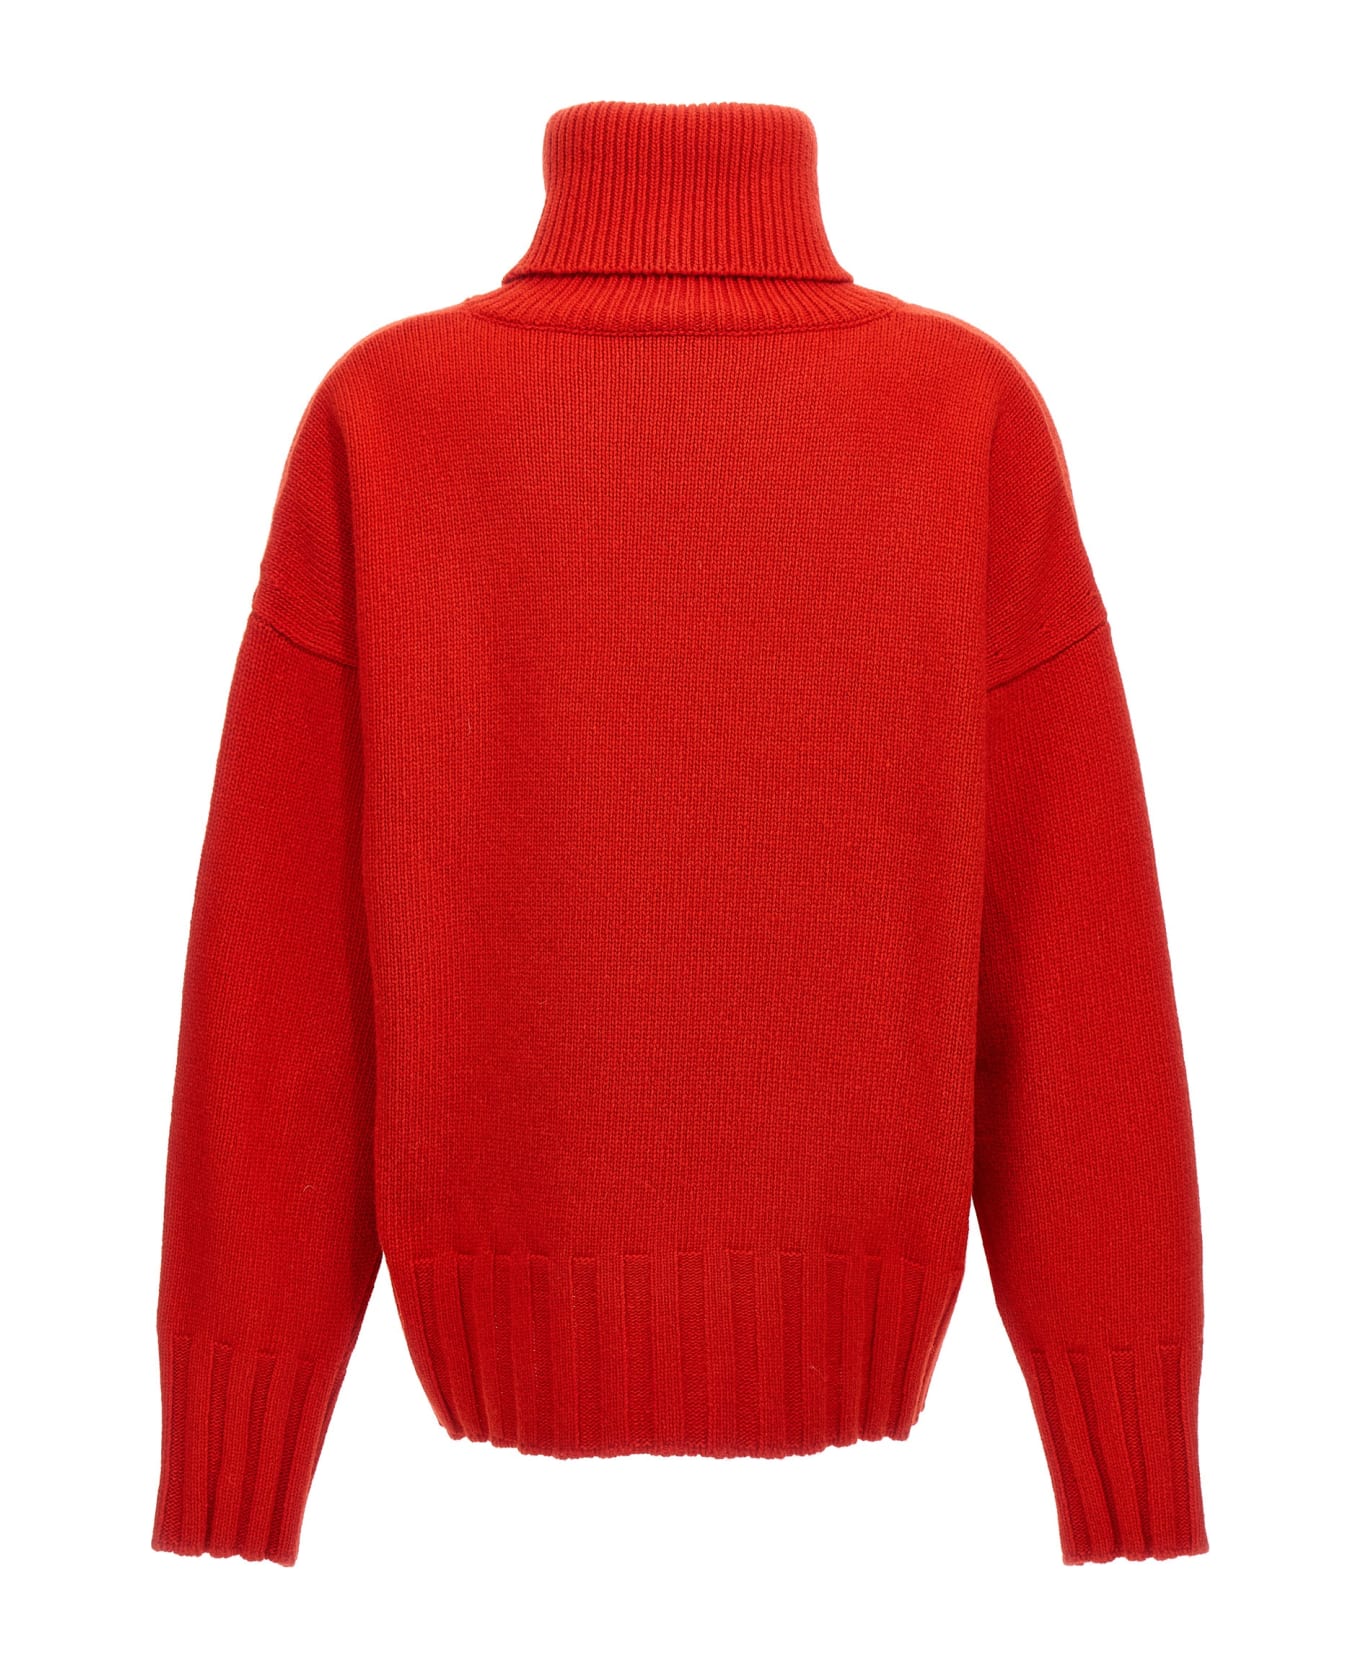 Made in Tomboy 'ely' Sweater - Red